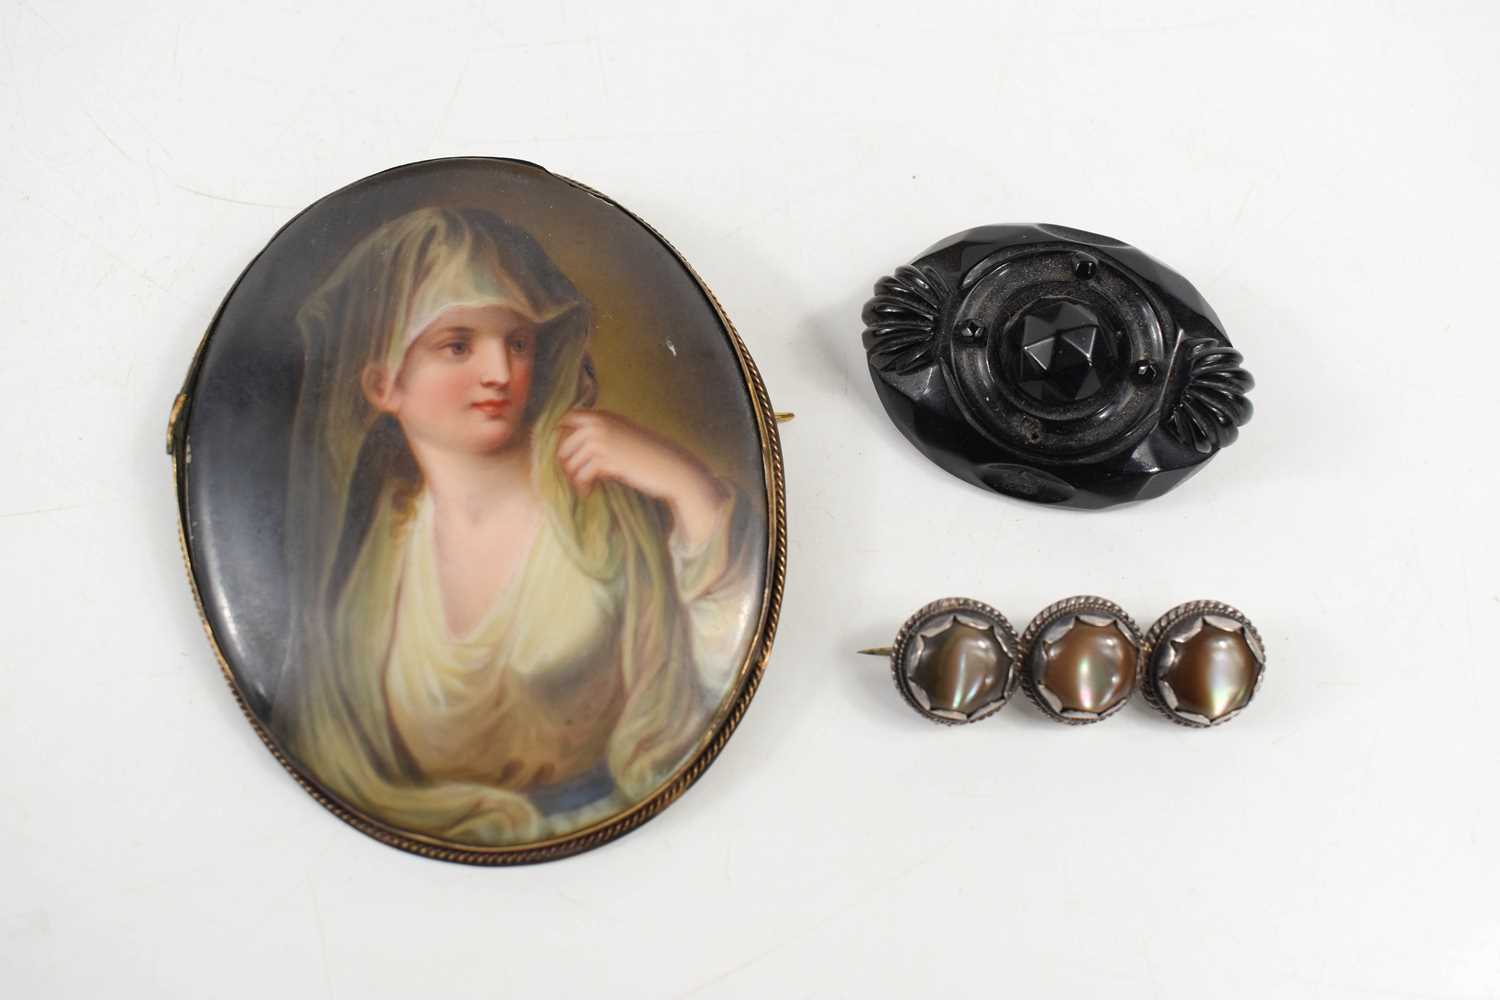 A 19th century miniature portrait brooch / pendant, likely French, the porcelain plaque hand painted